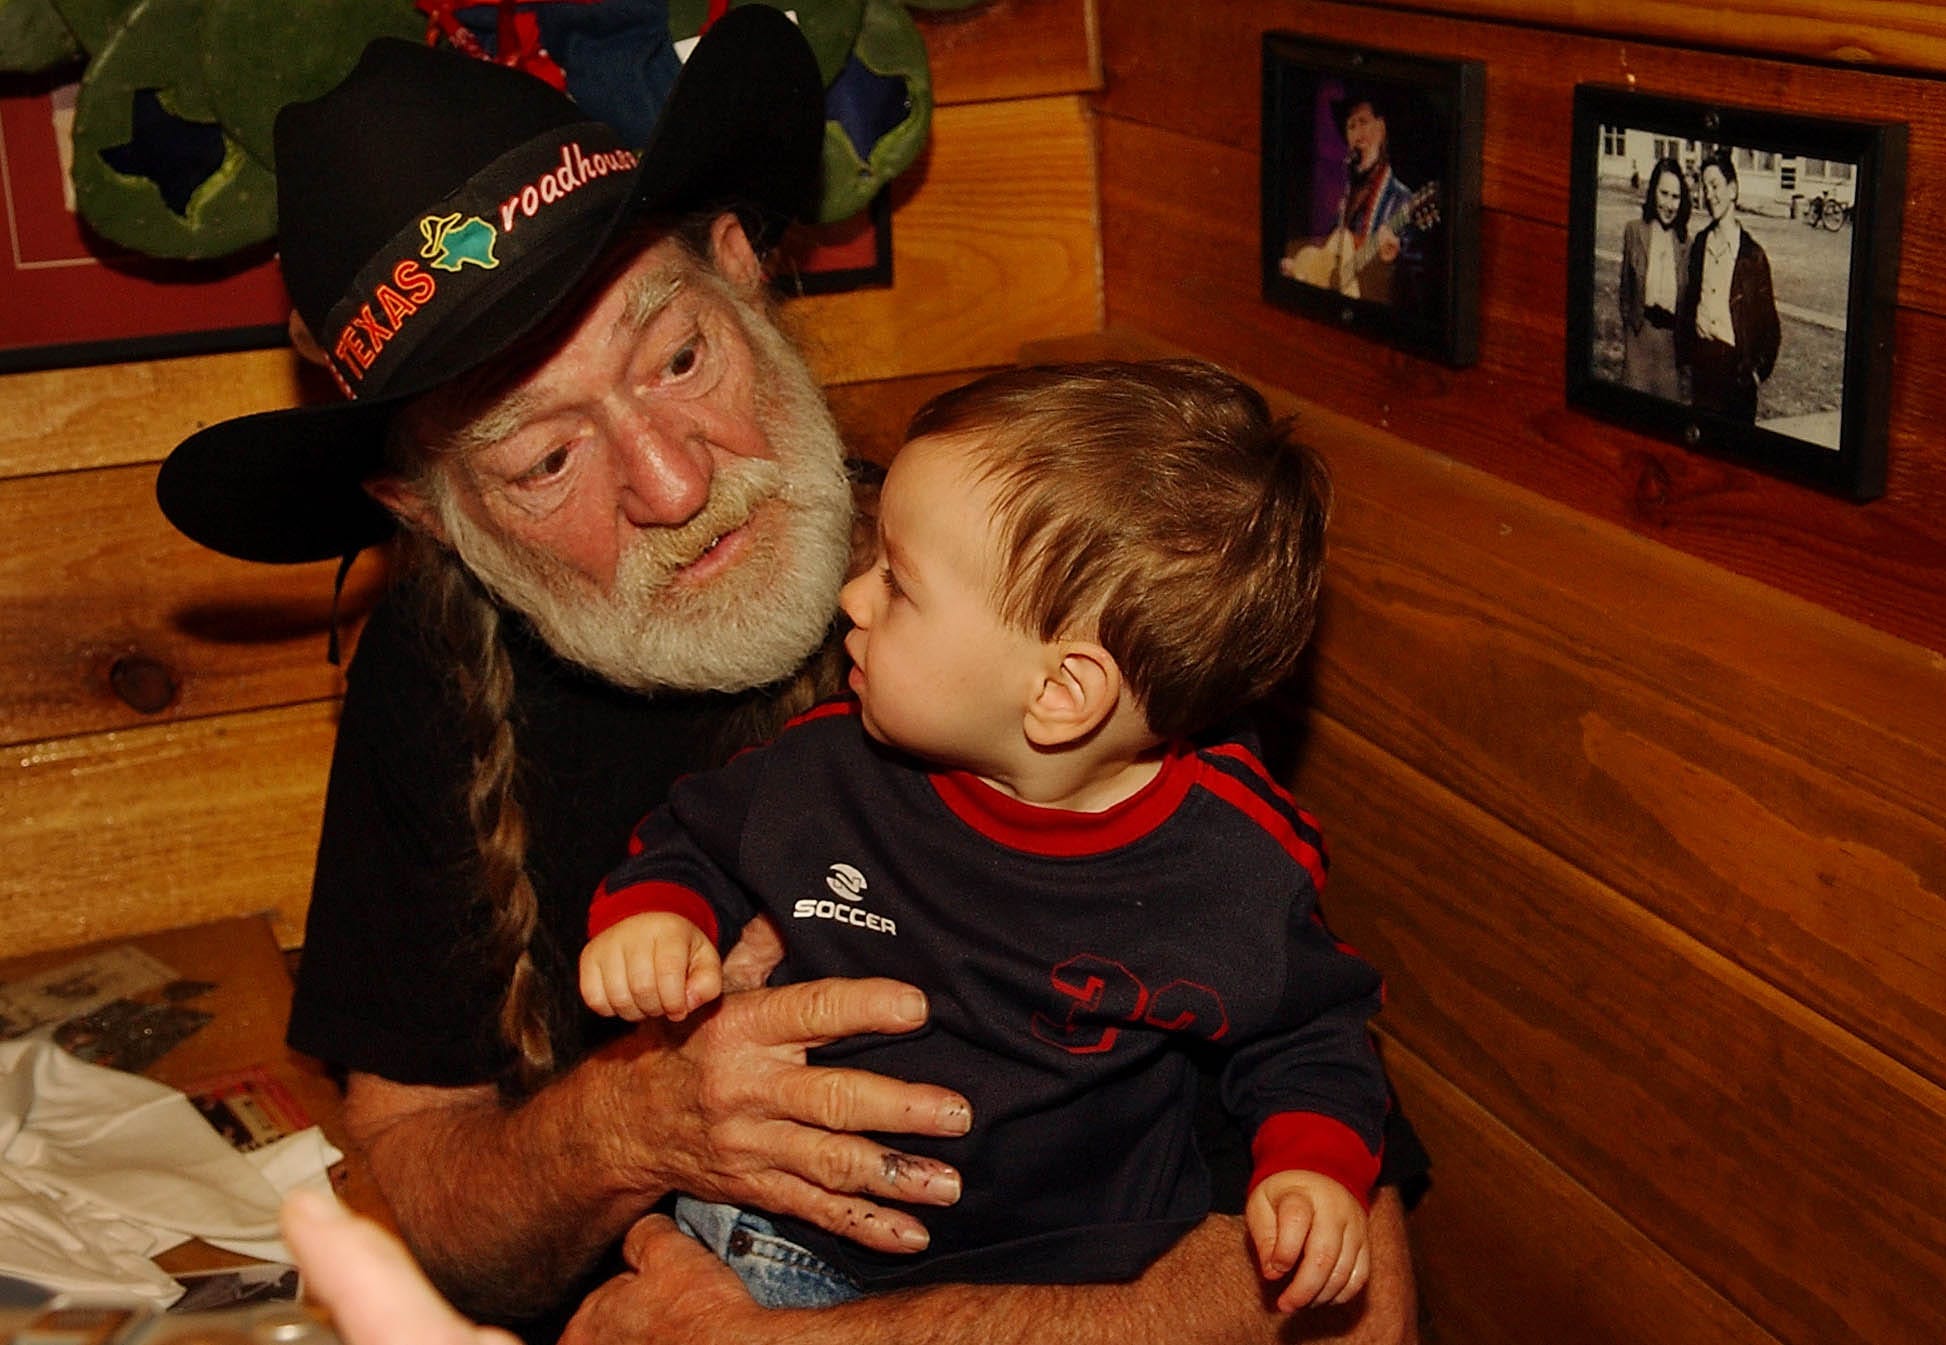 Country music legend Willie Nelson gets to know one-year-old Andrew Dittmar at the grand opening of Nelson's Texas Roadhouse restaurant in Austin on Thursday Dec. 16, 2004.  Andrew's mother, Kimberly Dittmar, won a KVET contest to get to meet Willie Nelson.